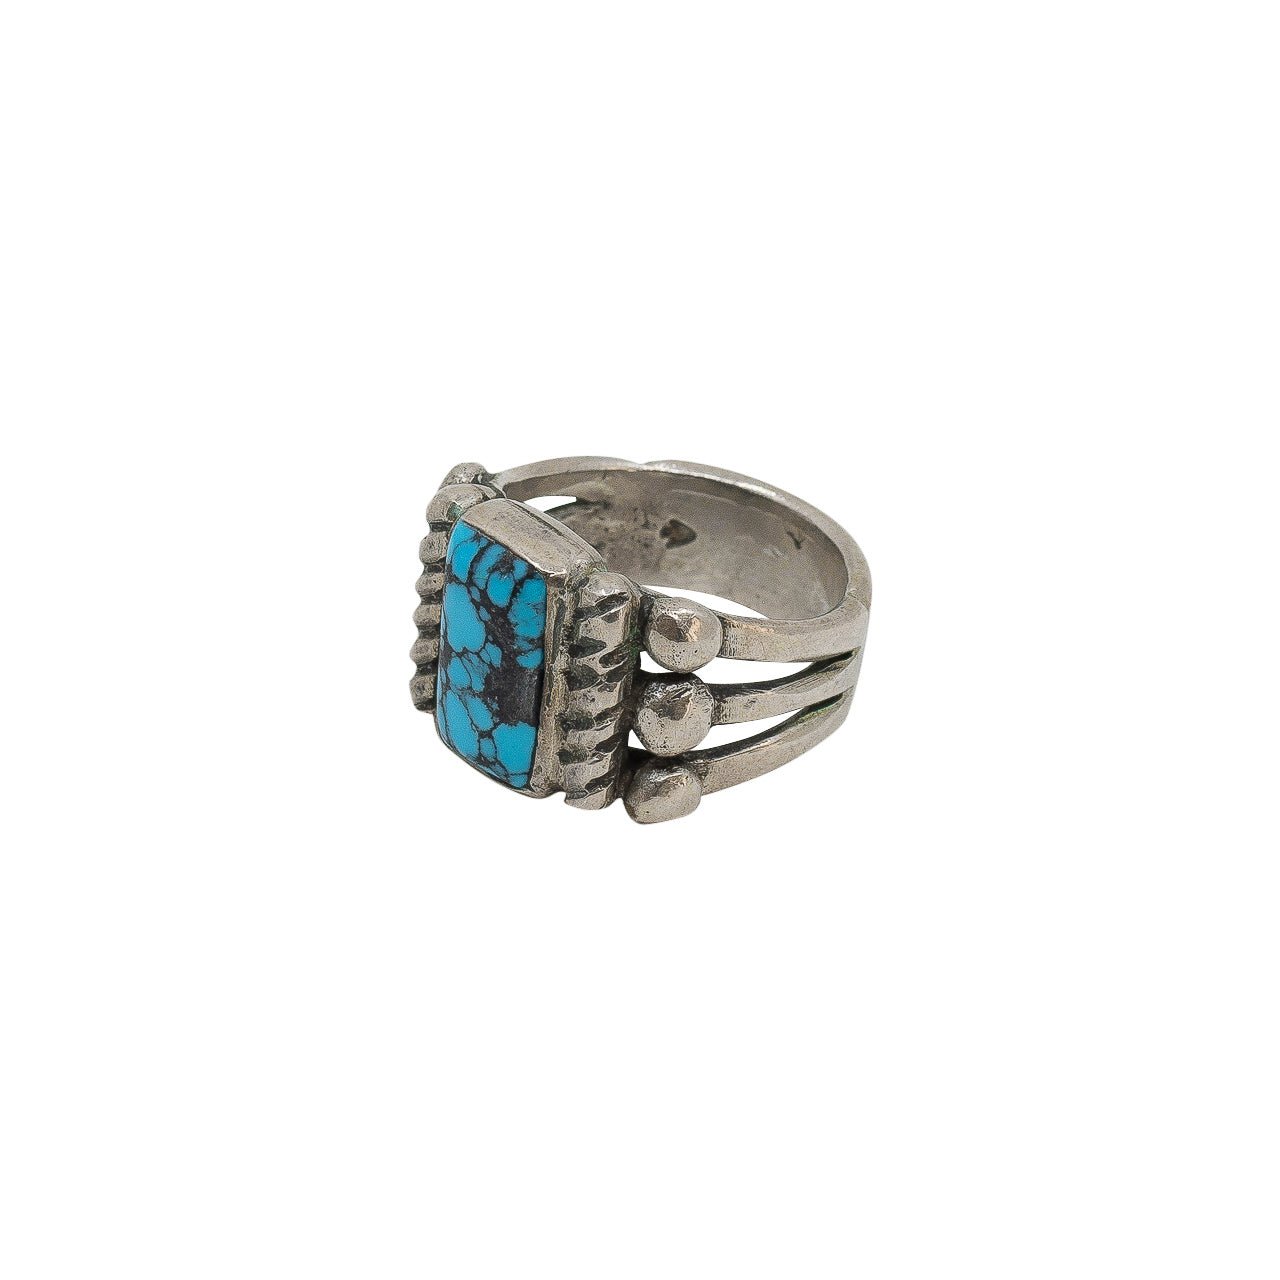 Old Style Turquoise Ring by Greg Lewis - Turquoise & Tufa